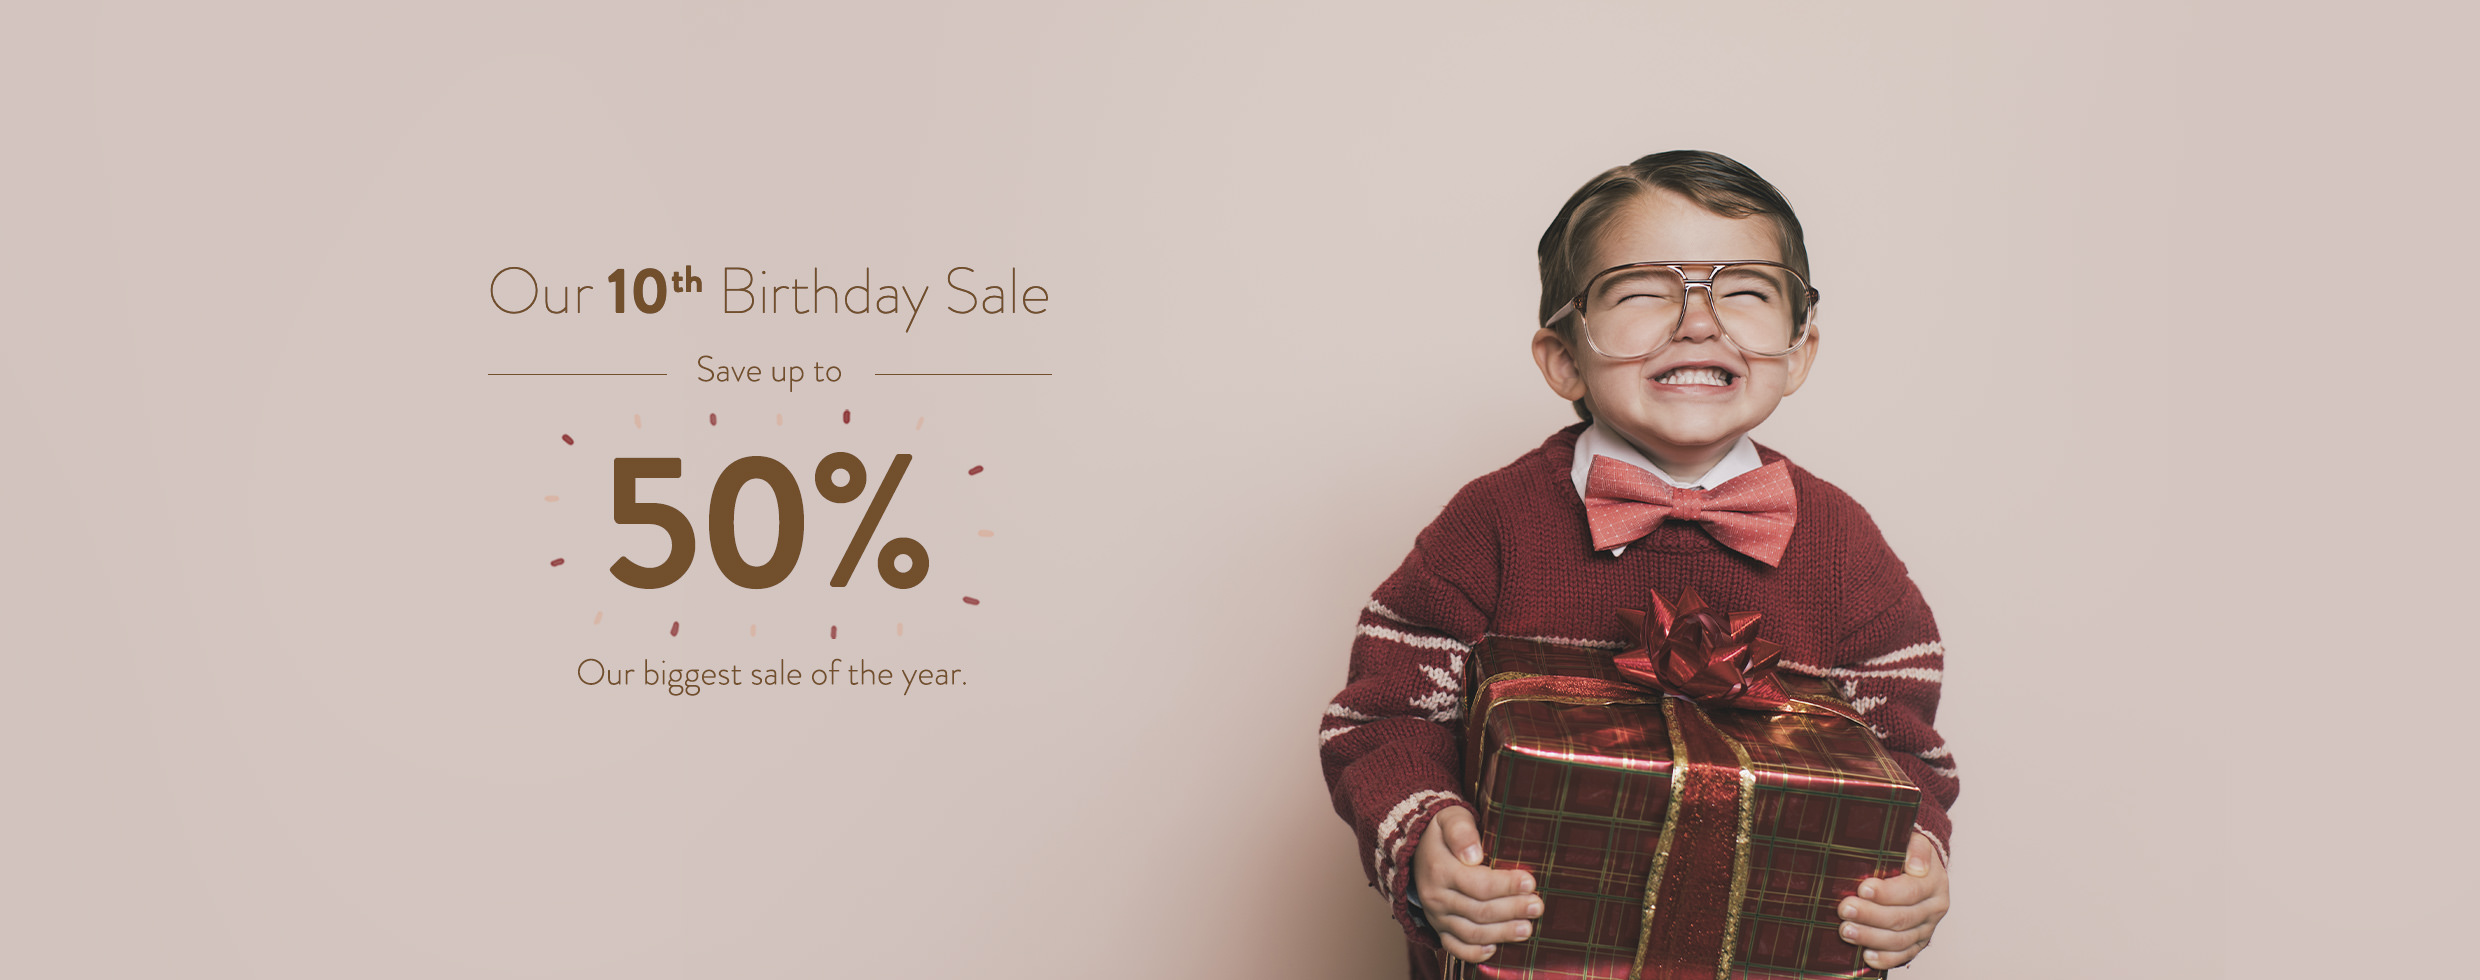 Our 10th Birthday Sale - Save up to 50%